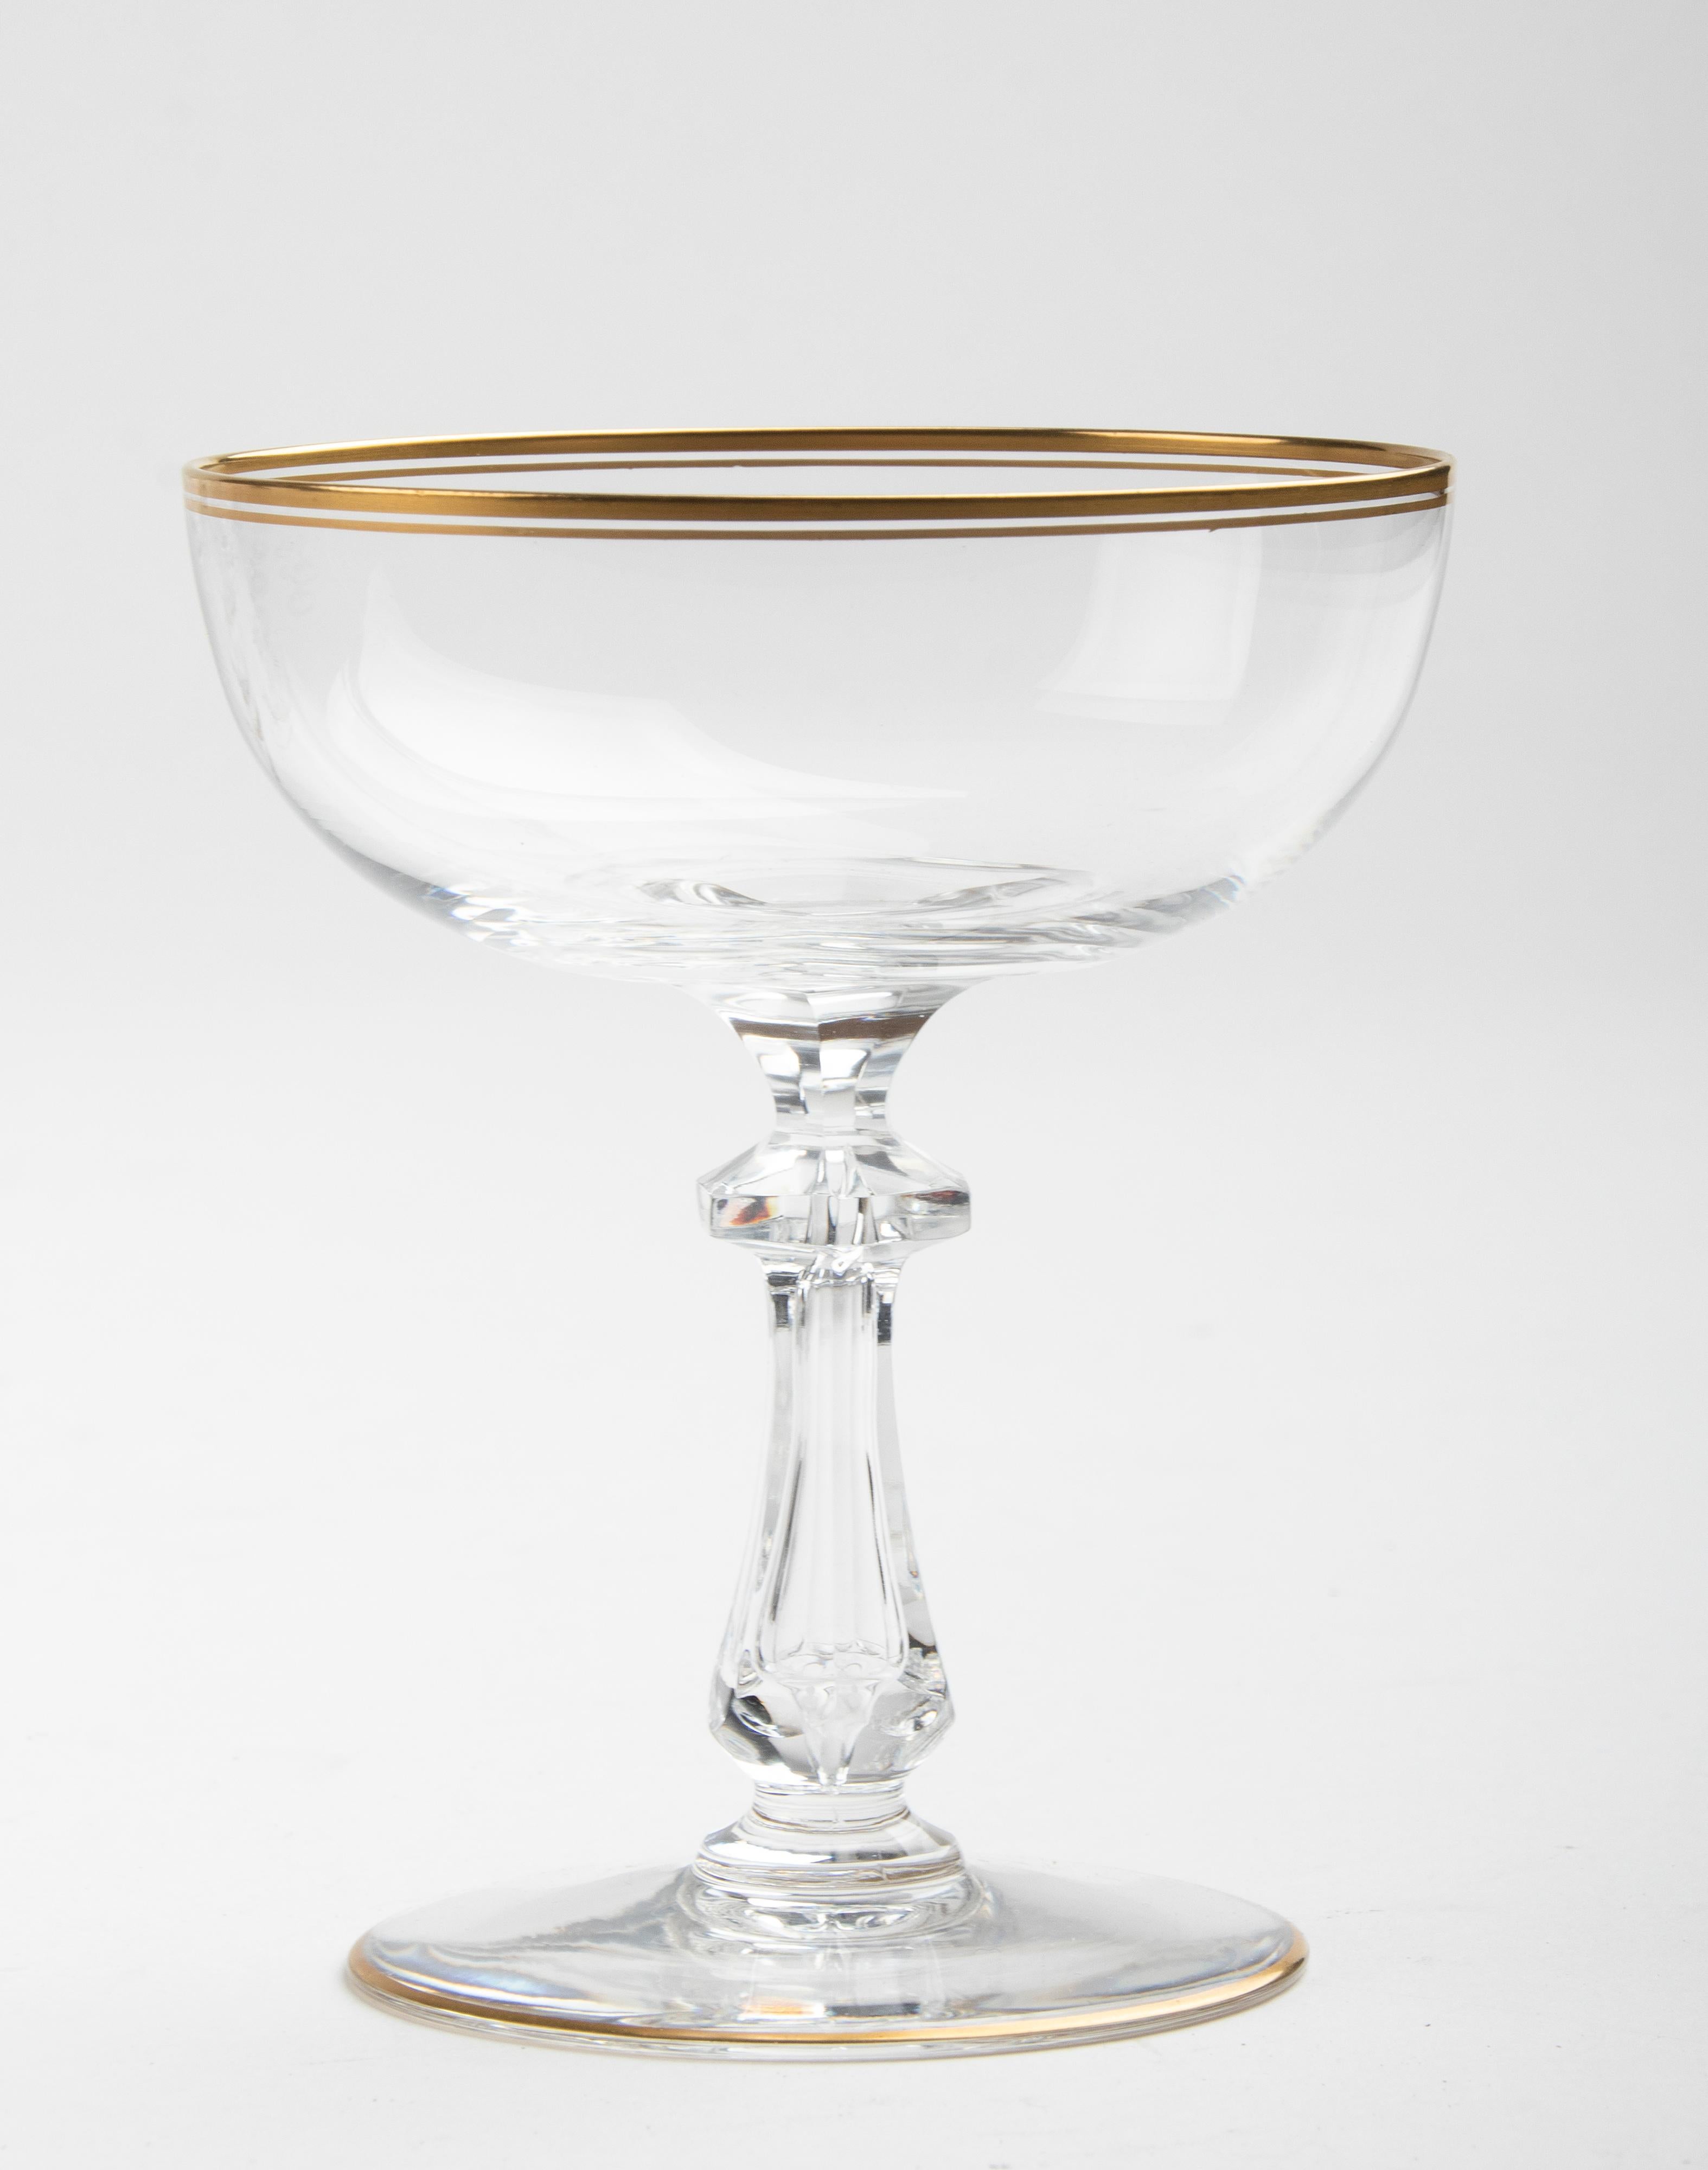 Beautiful set of 12 crystal champagne coupes or cocktail glasses. The crystal is of a very refined quality. The stem and foot are strong, the calyxes are thin. The glasses are decorated with narrow gold-coloured edges and the inside of the stem is